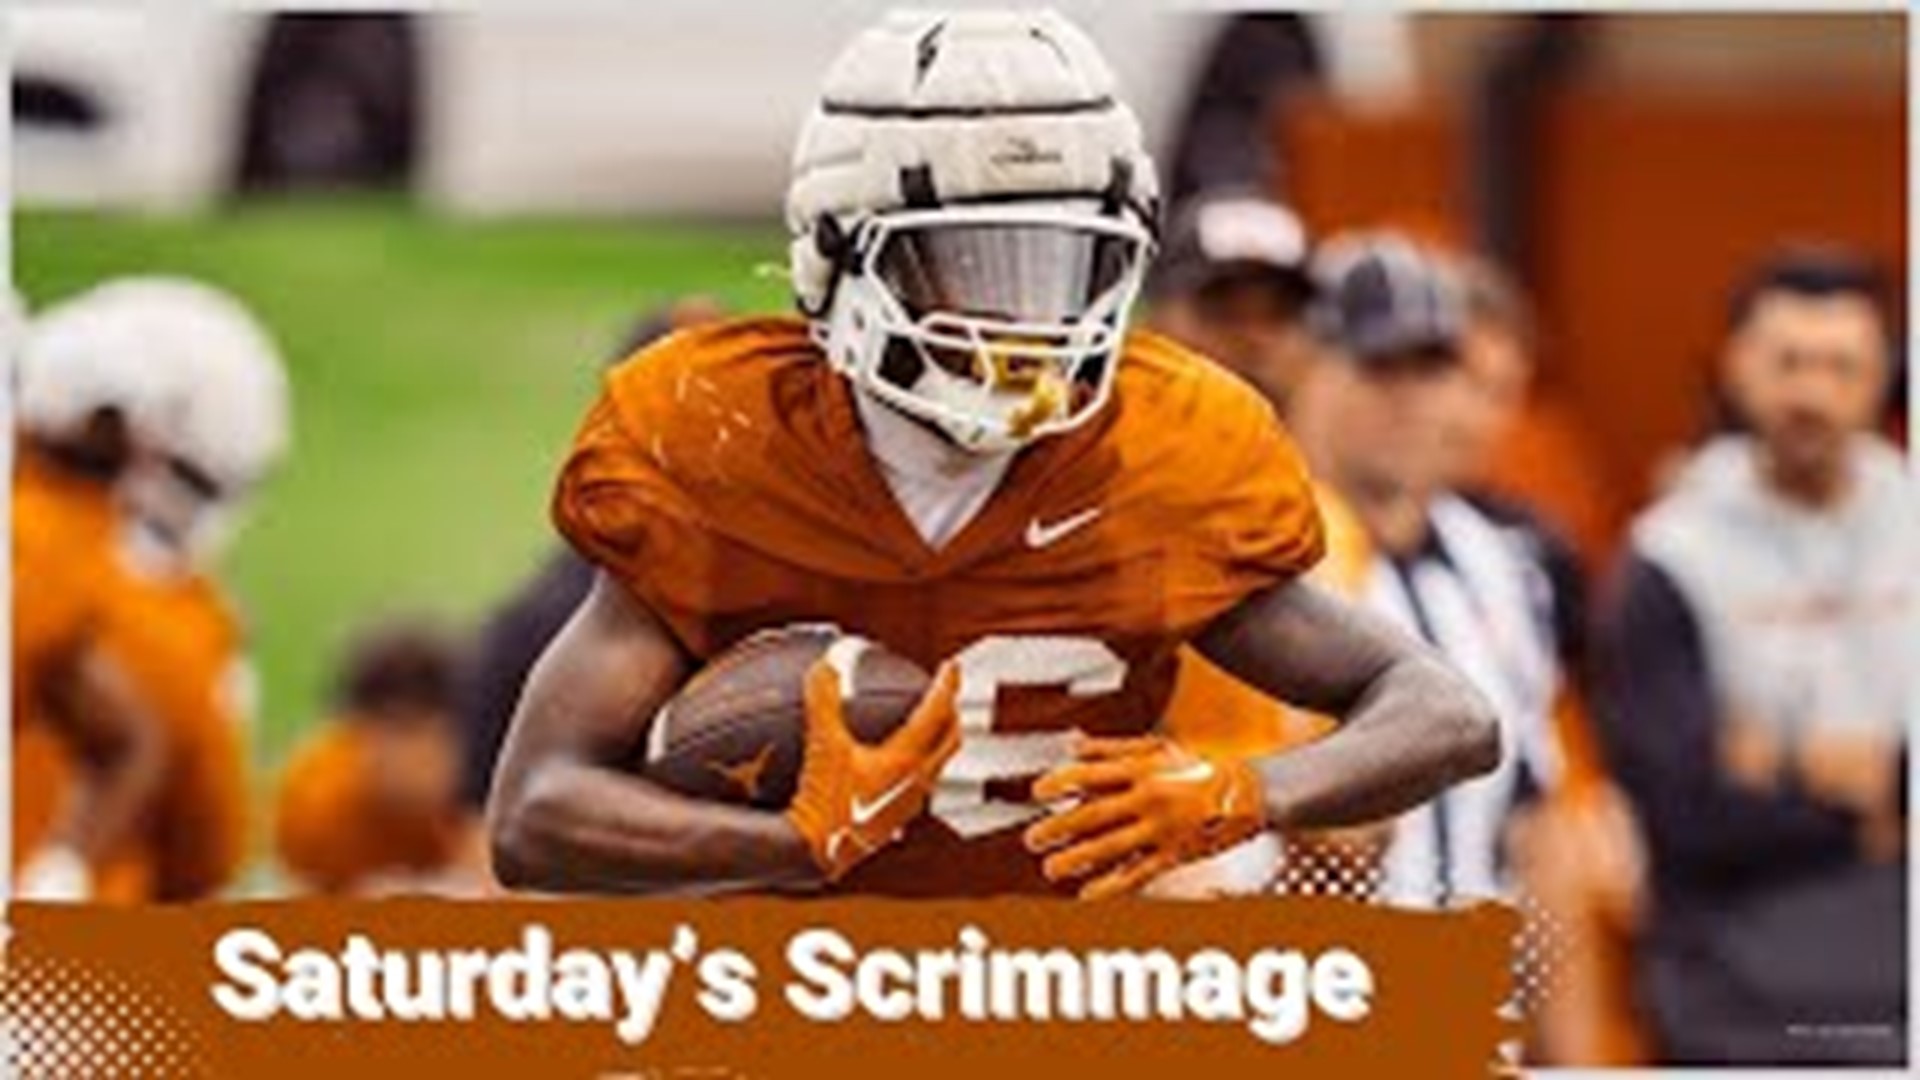 As we get closer to the end of spring practices, and the orange and white game on April 20th, things are heating up in terms of intensity for the Longhorns.